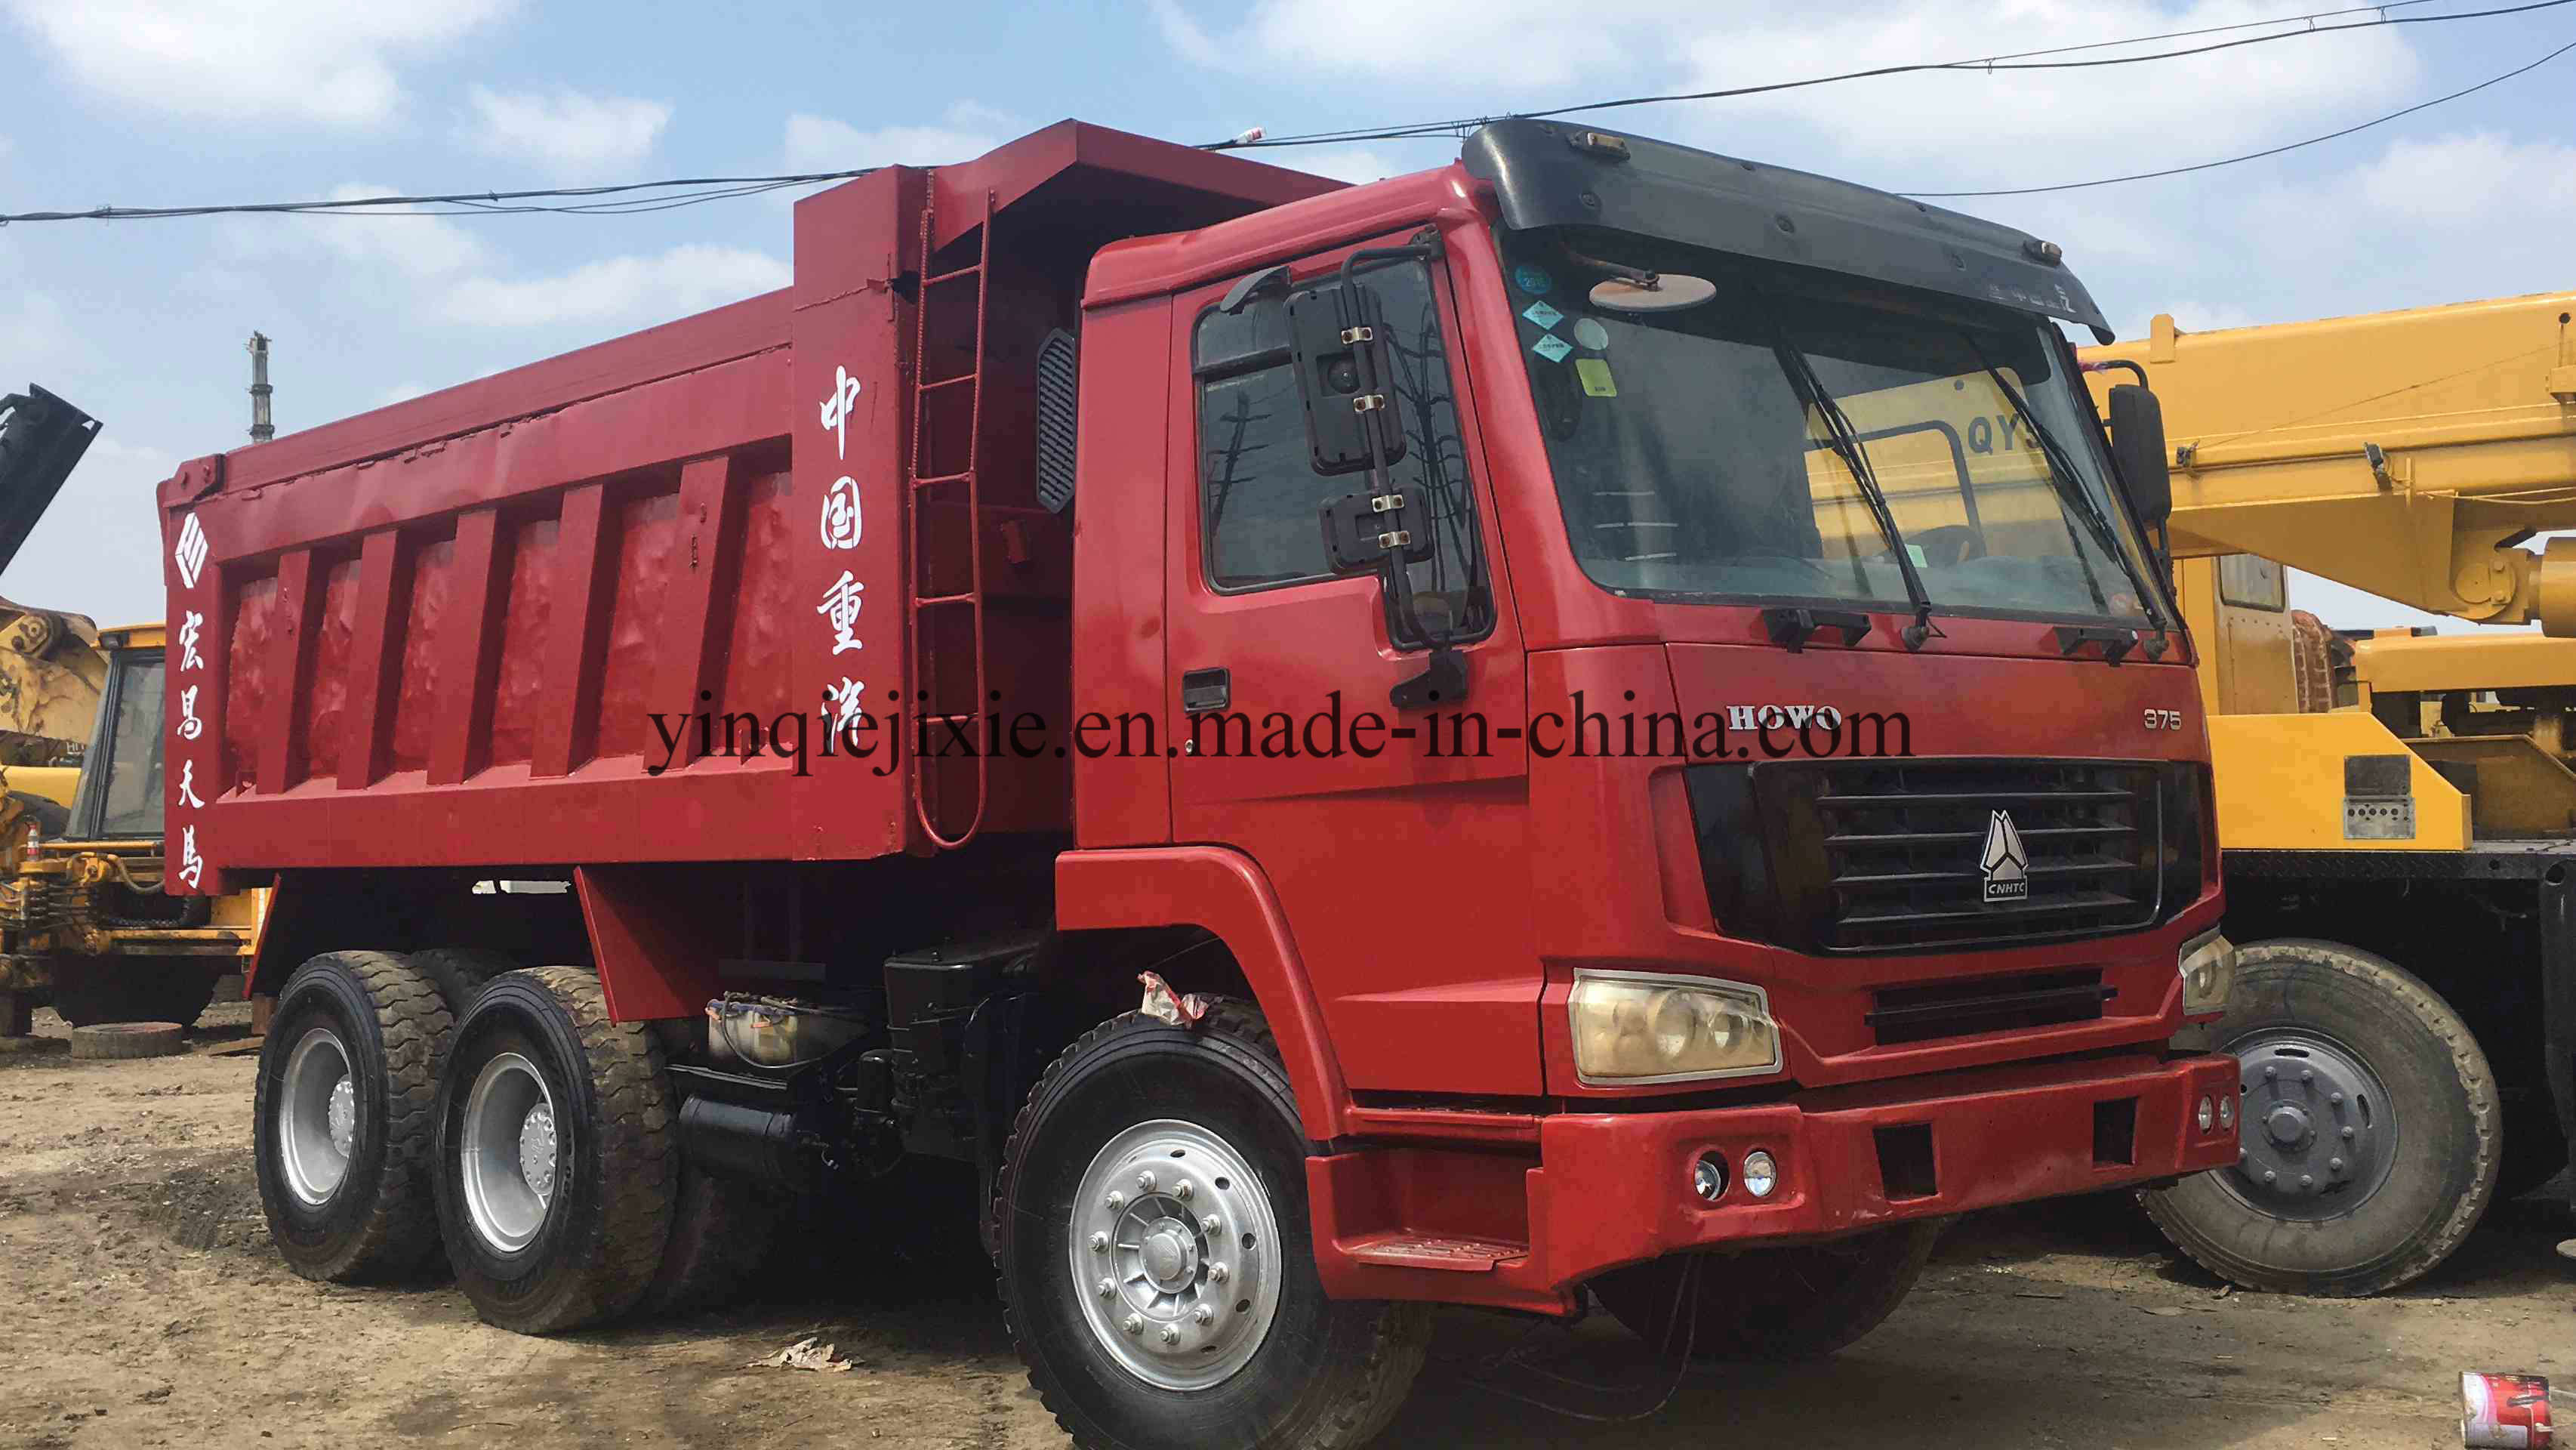 Used HOWO 375 Dump Truck in Good Condition From Trust Chinese Supplier